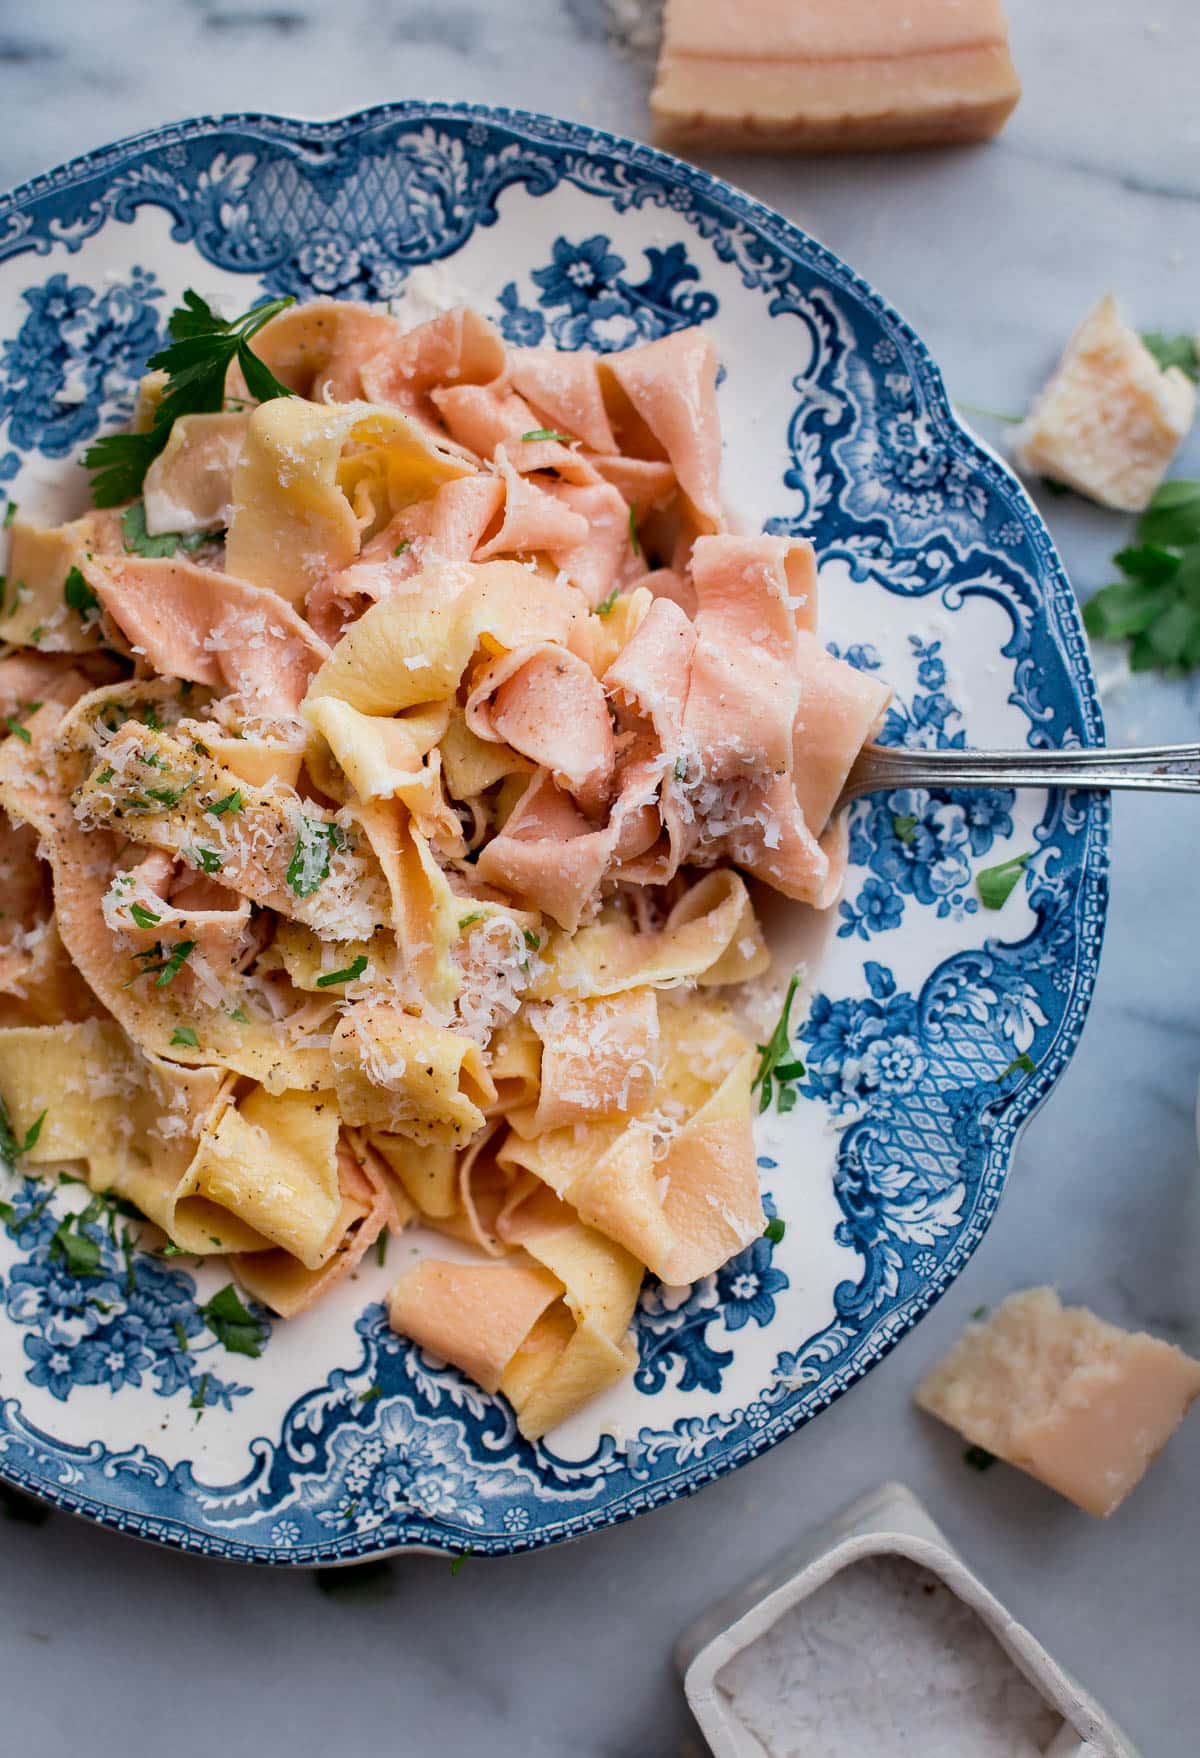 How to Make Perfect Pappardelle Pasta at Home - The Clever Carrot